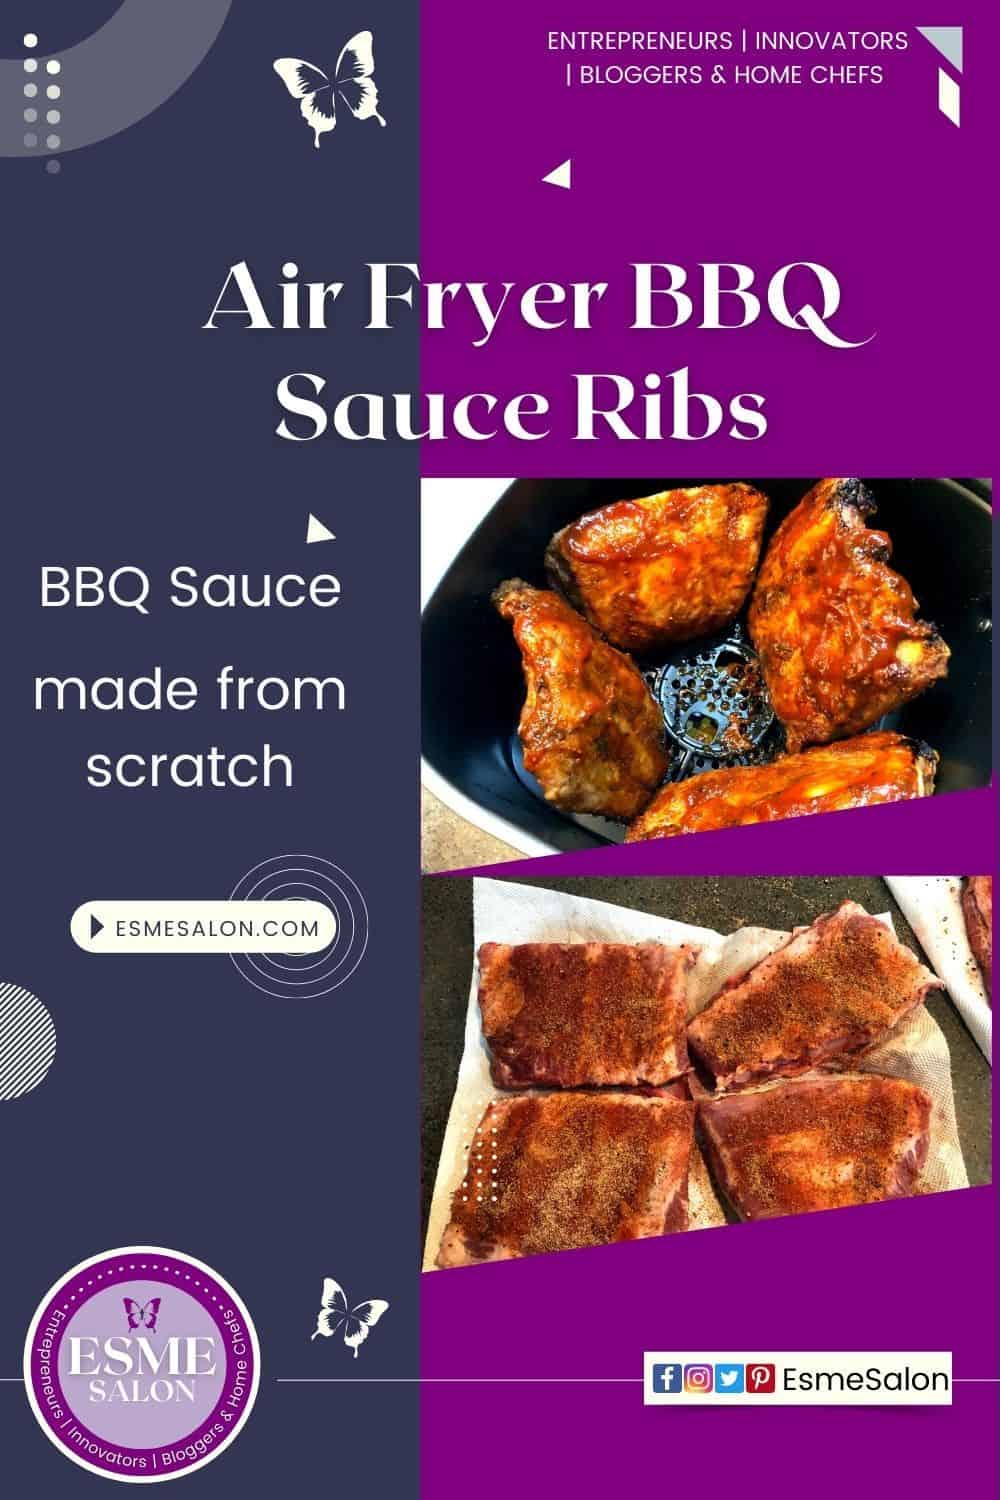 4 pieces of Ribs with dry rub and homemade BBQ sauce prepared in the Air Fryer